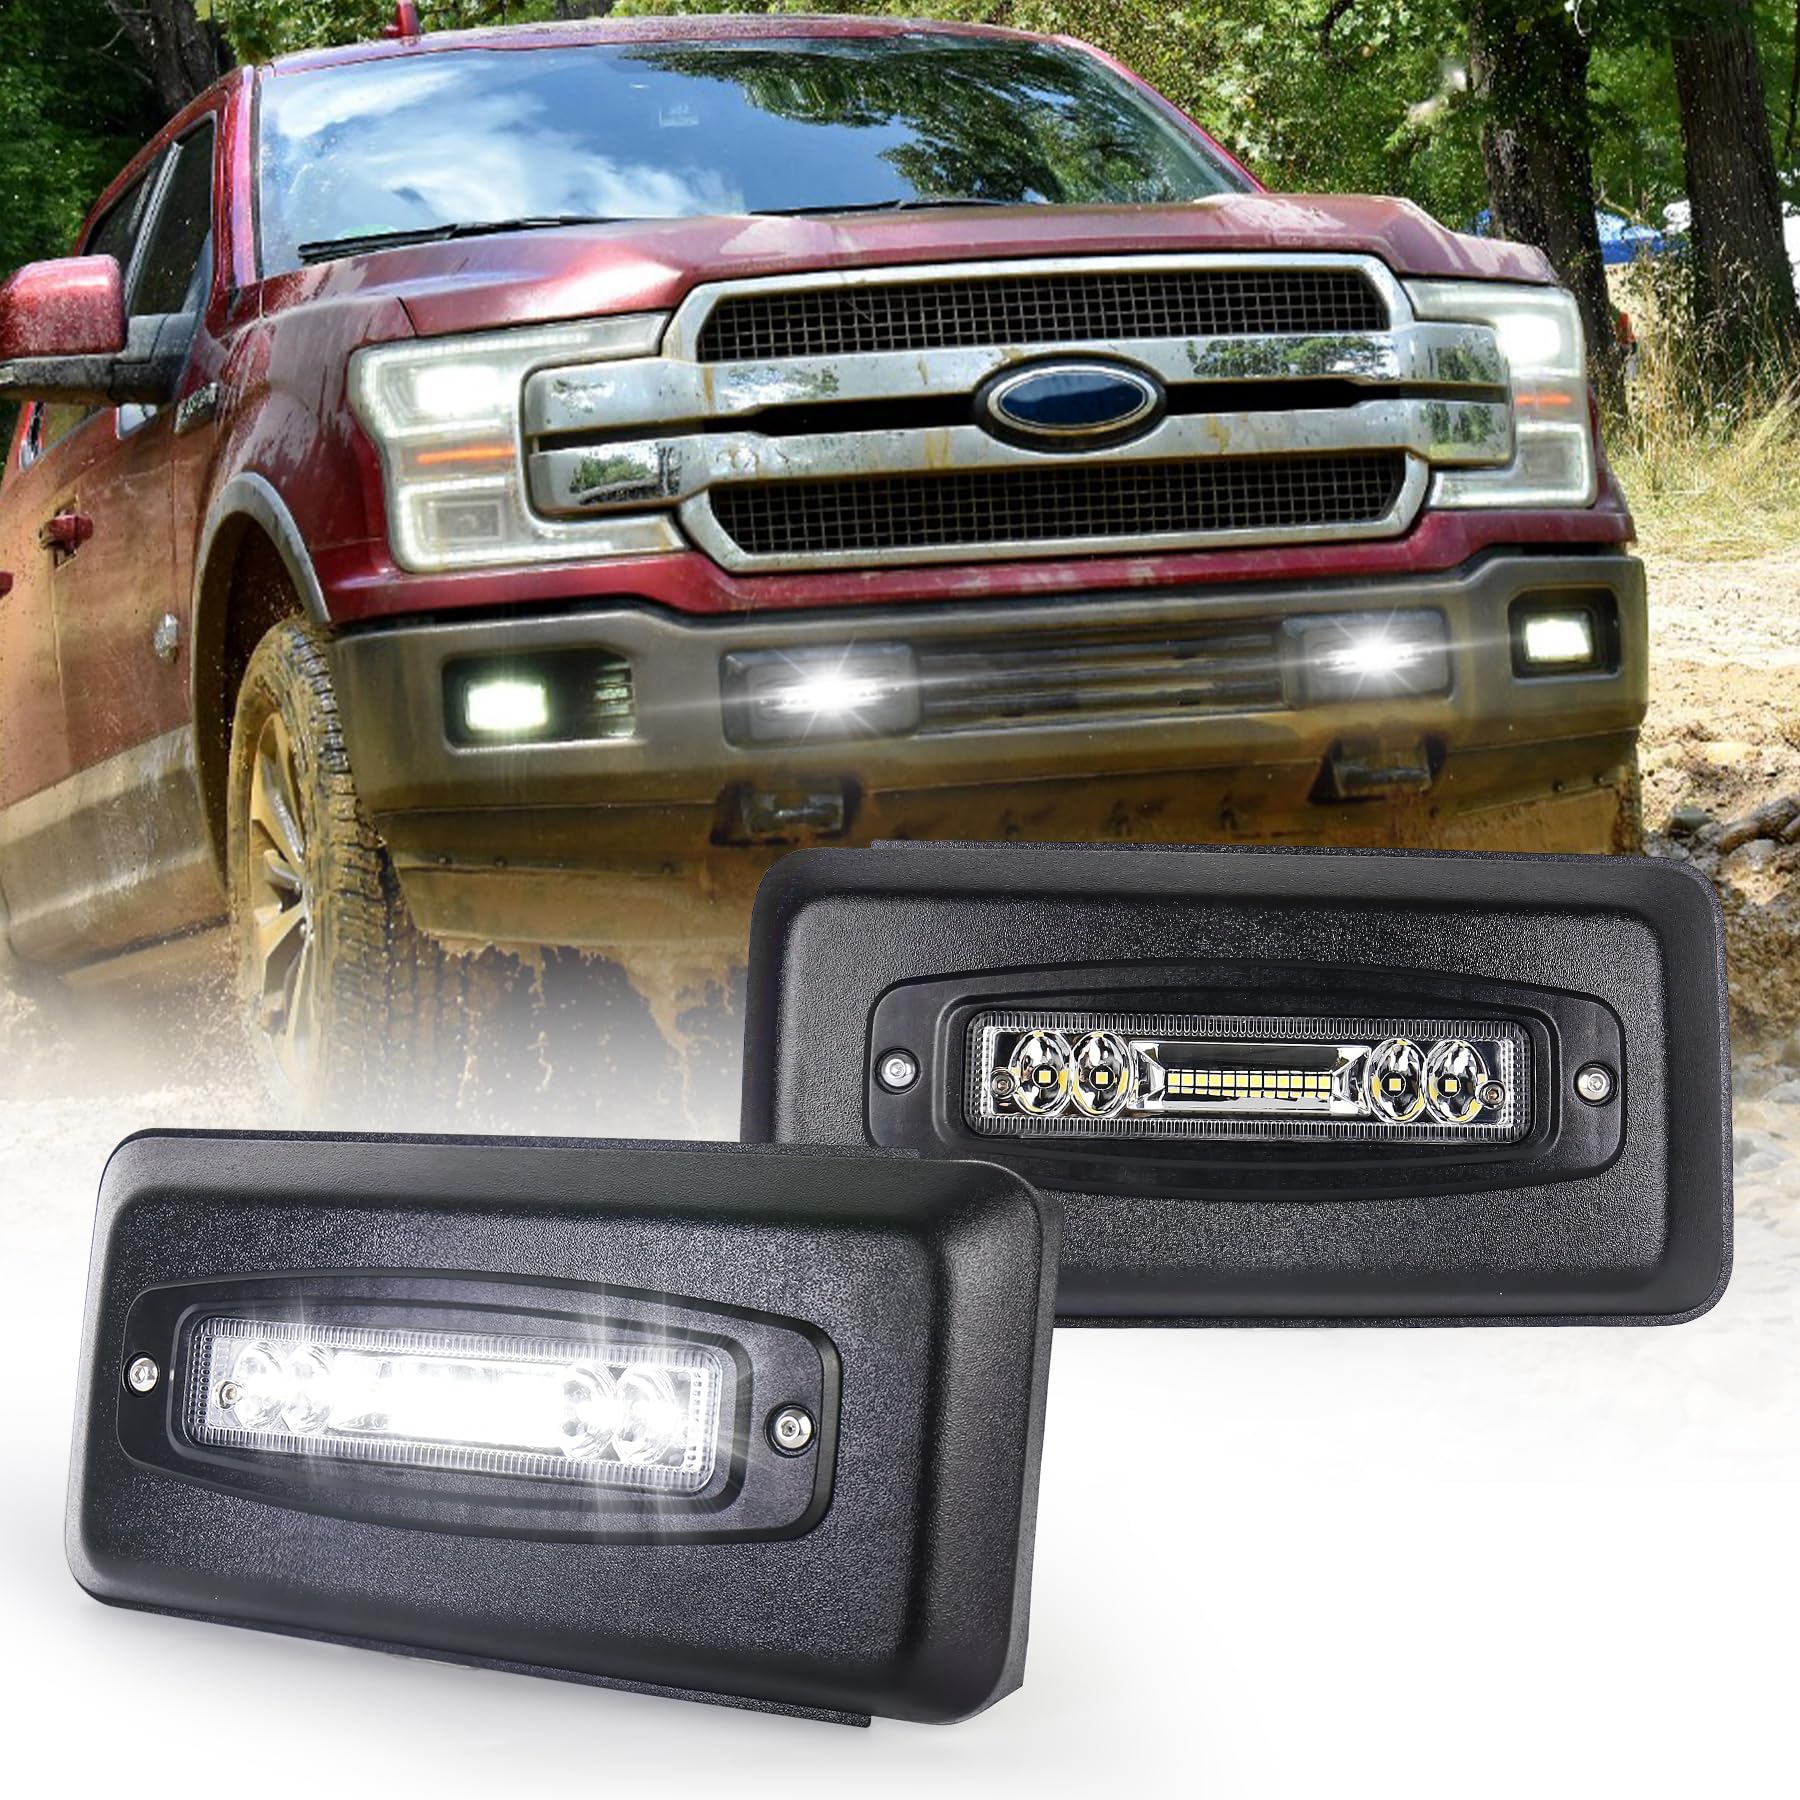 MOVOTOR Bumper Guards Pad with LED Lights 300% Brighter Replacement Inserts End Caps for 2018-2020 Ford F150